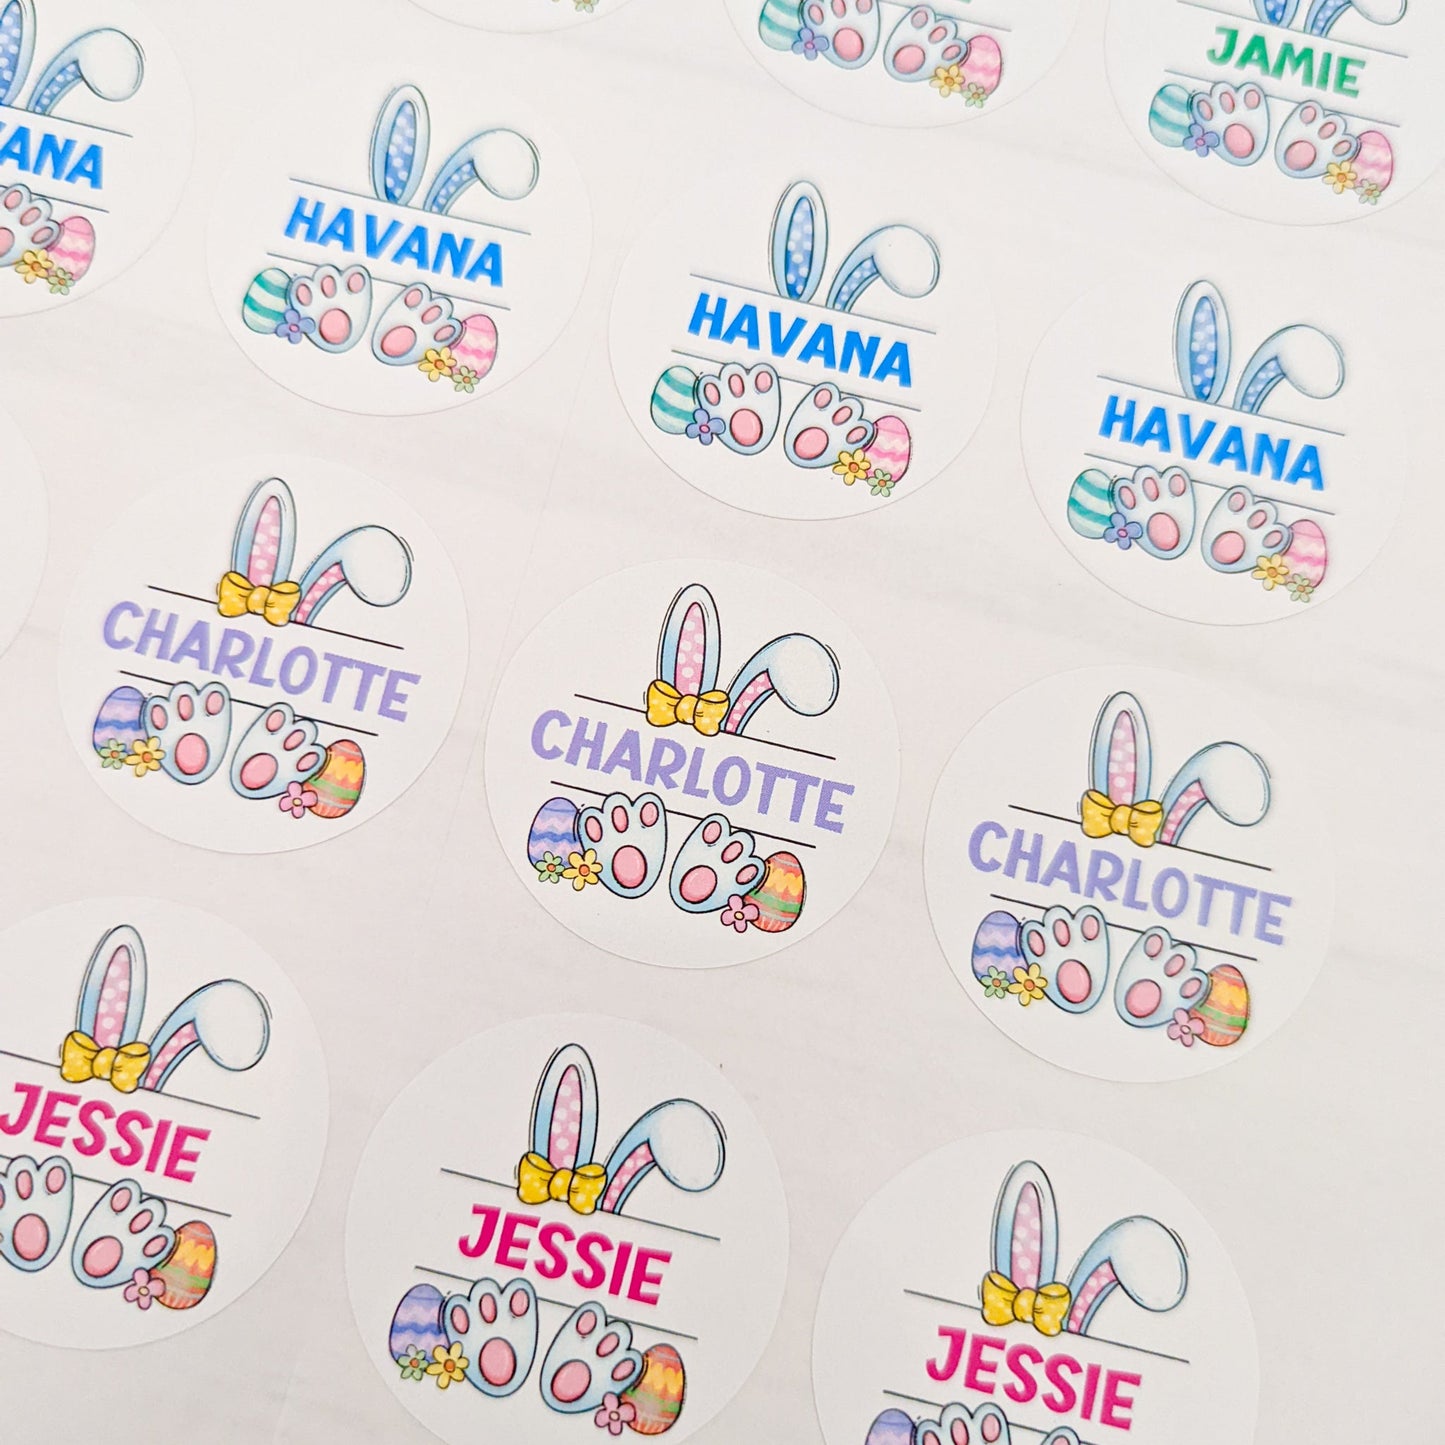 E&L Designs | Custom Foil Stickers Personalised Bunny Stickers, Page of 16 big, 18 small